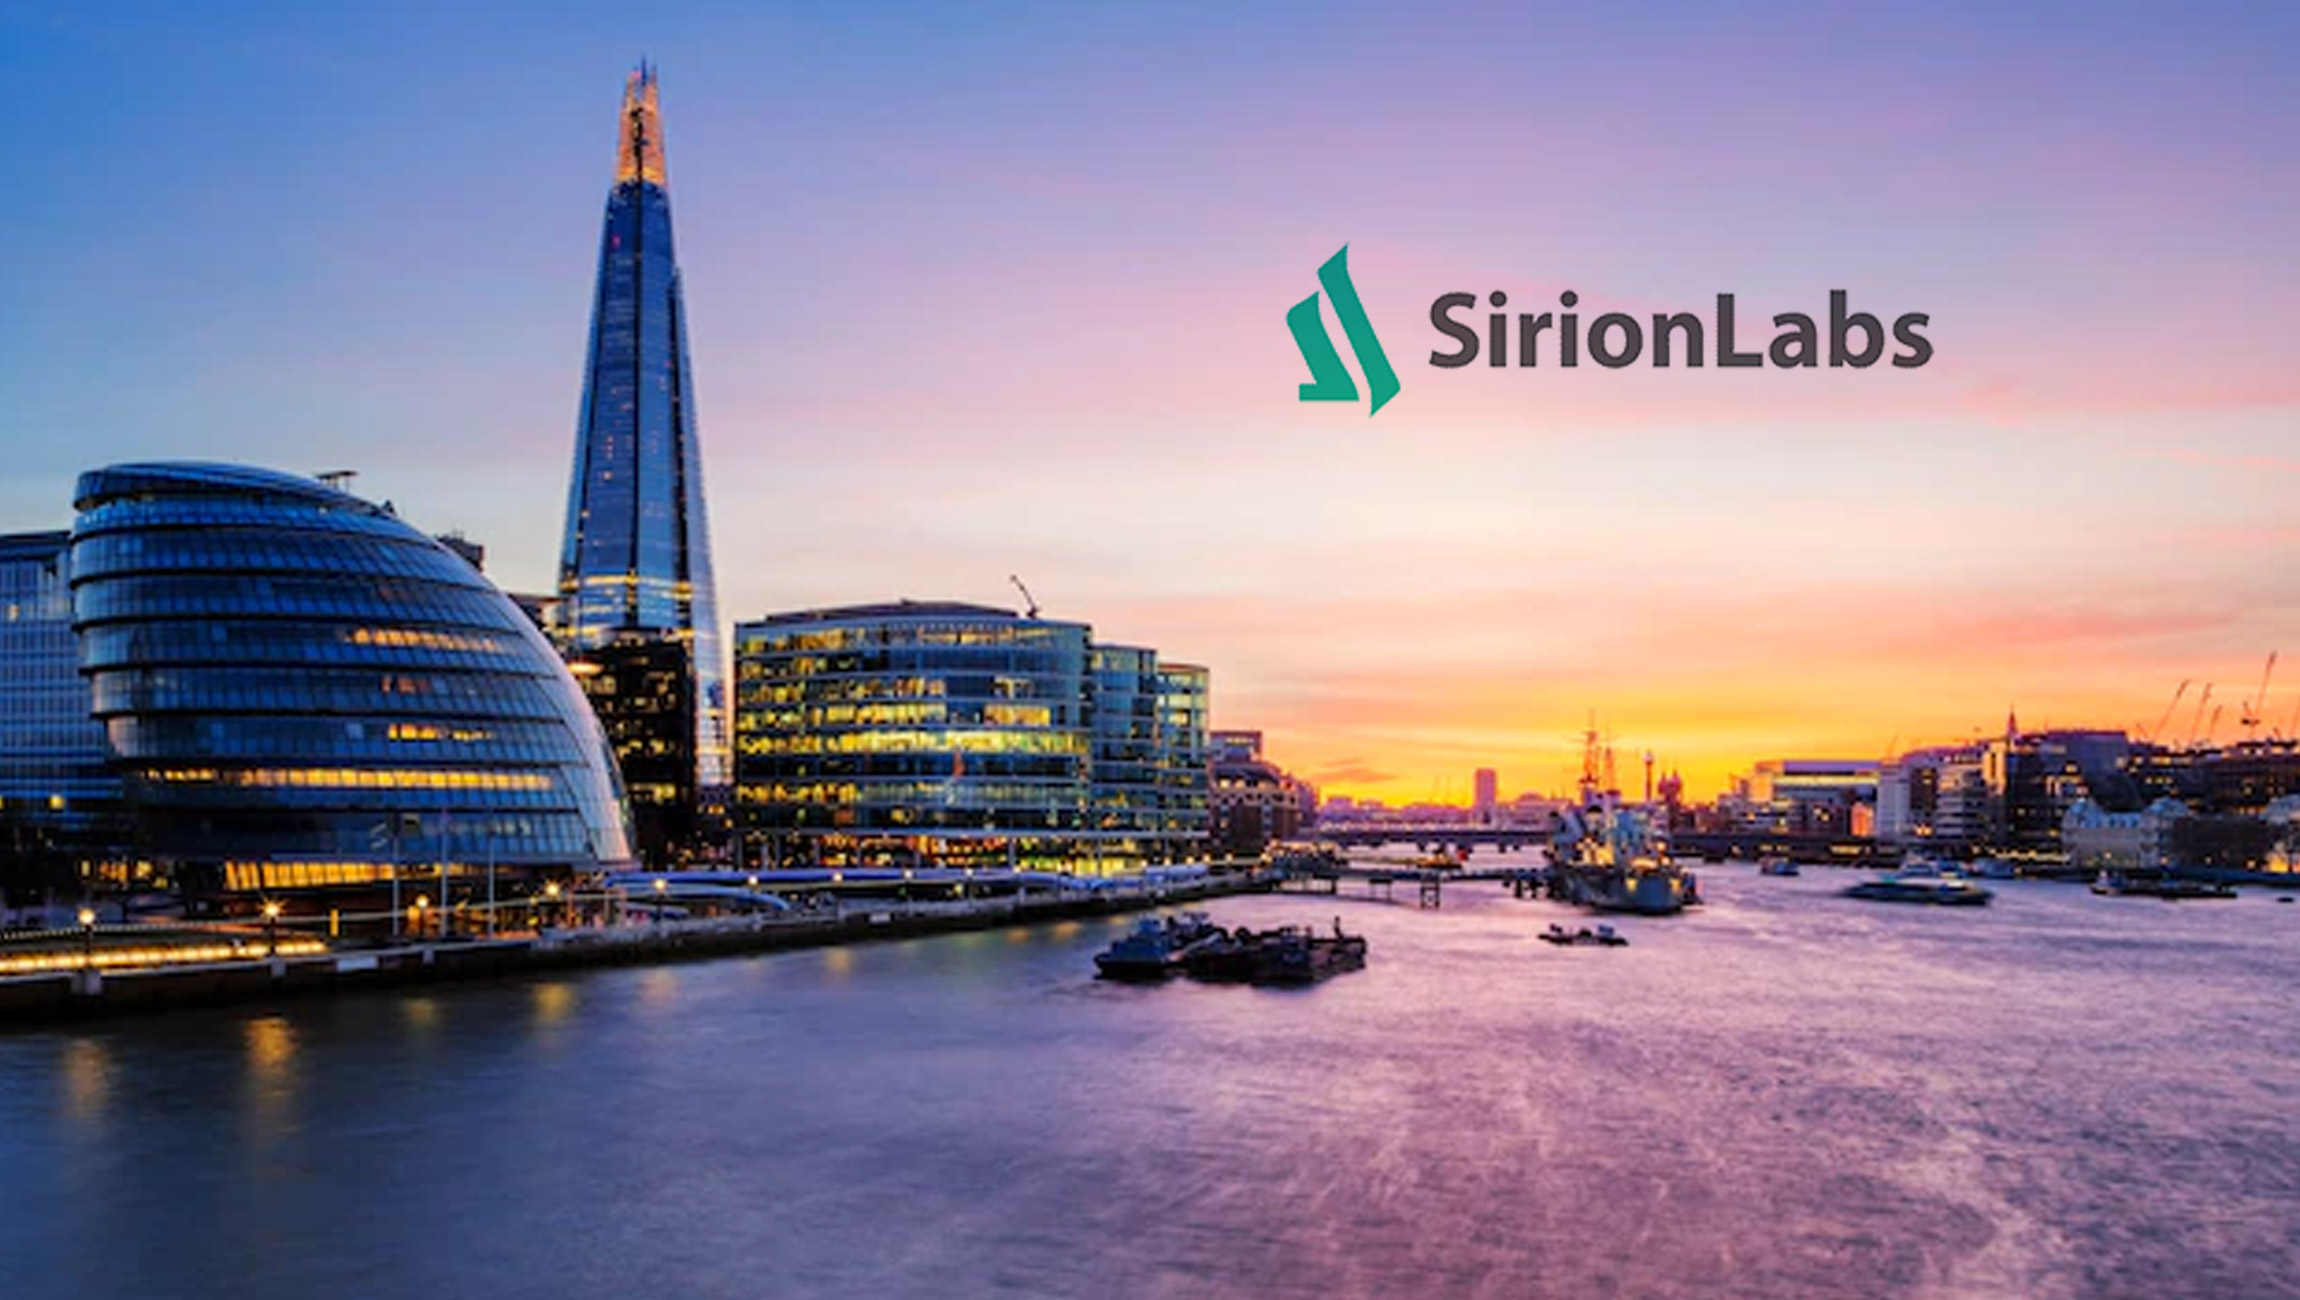 SirionLabs to Present Leading Digital Contract Transformation Practices and Benefits at WorldCC Europe Summit in London